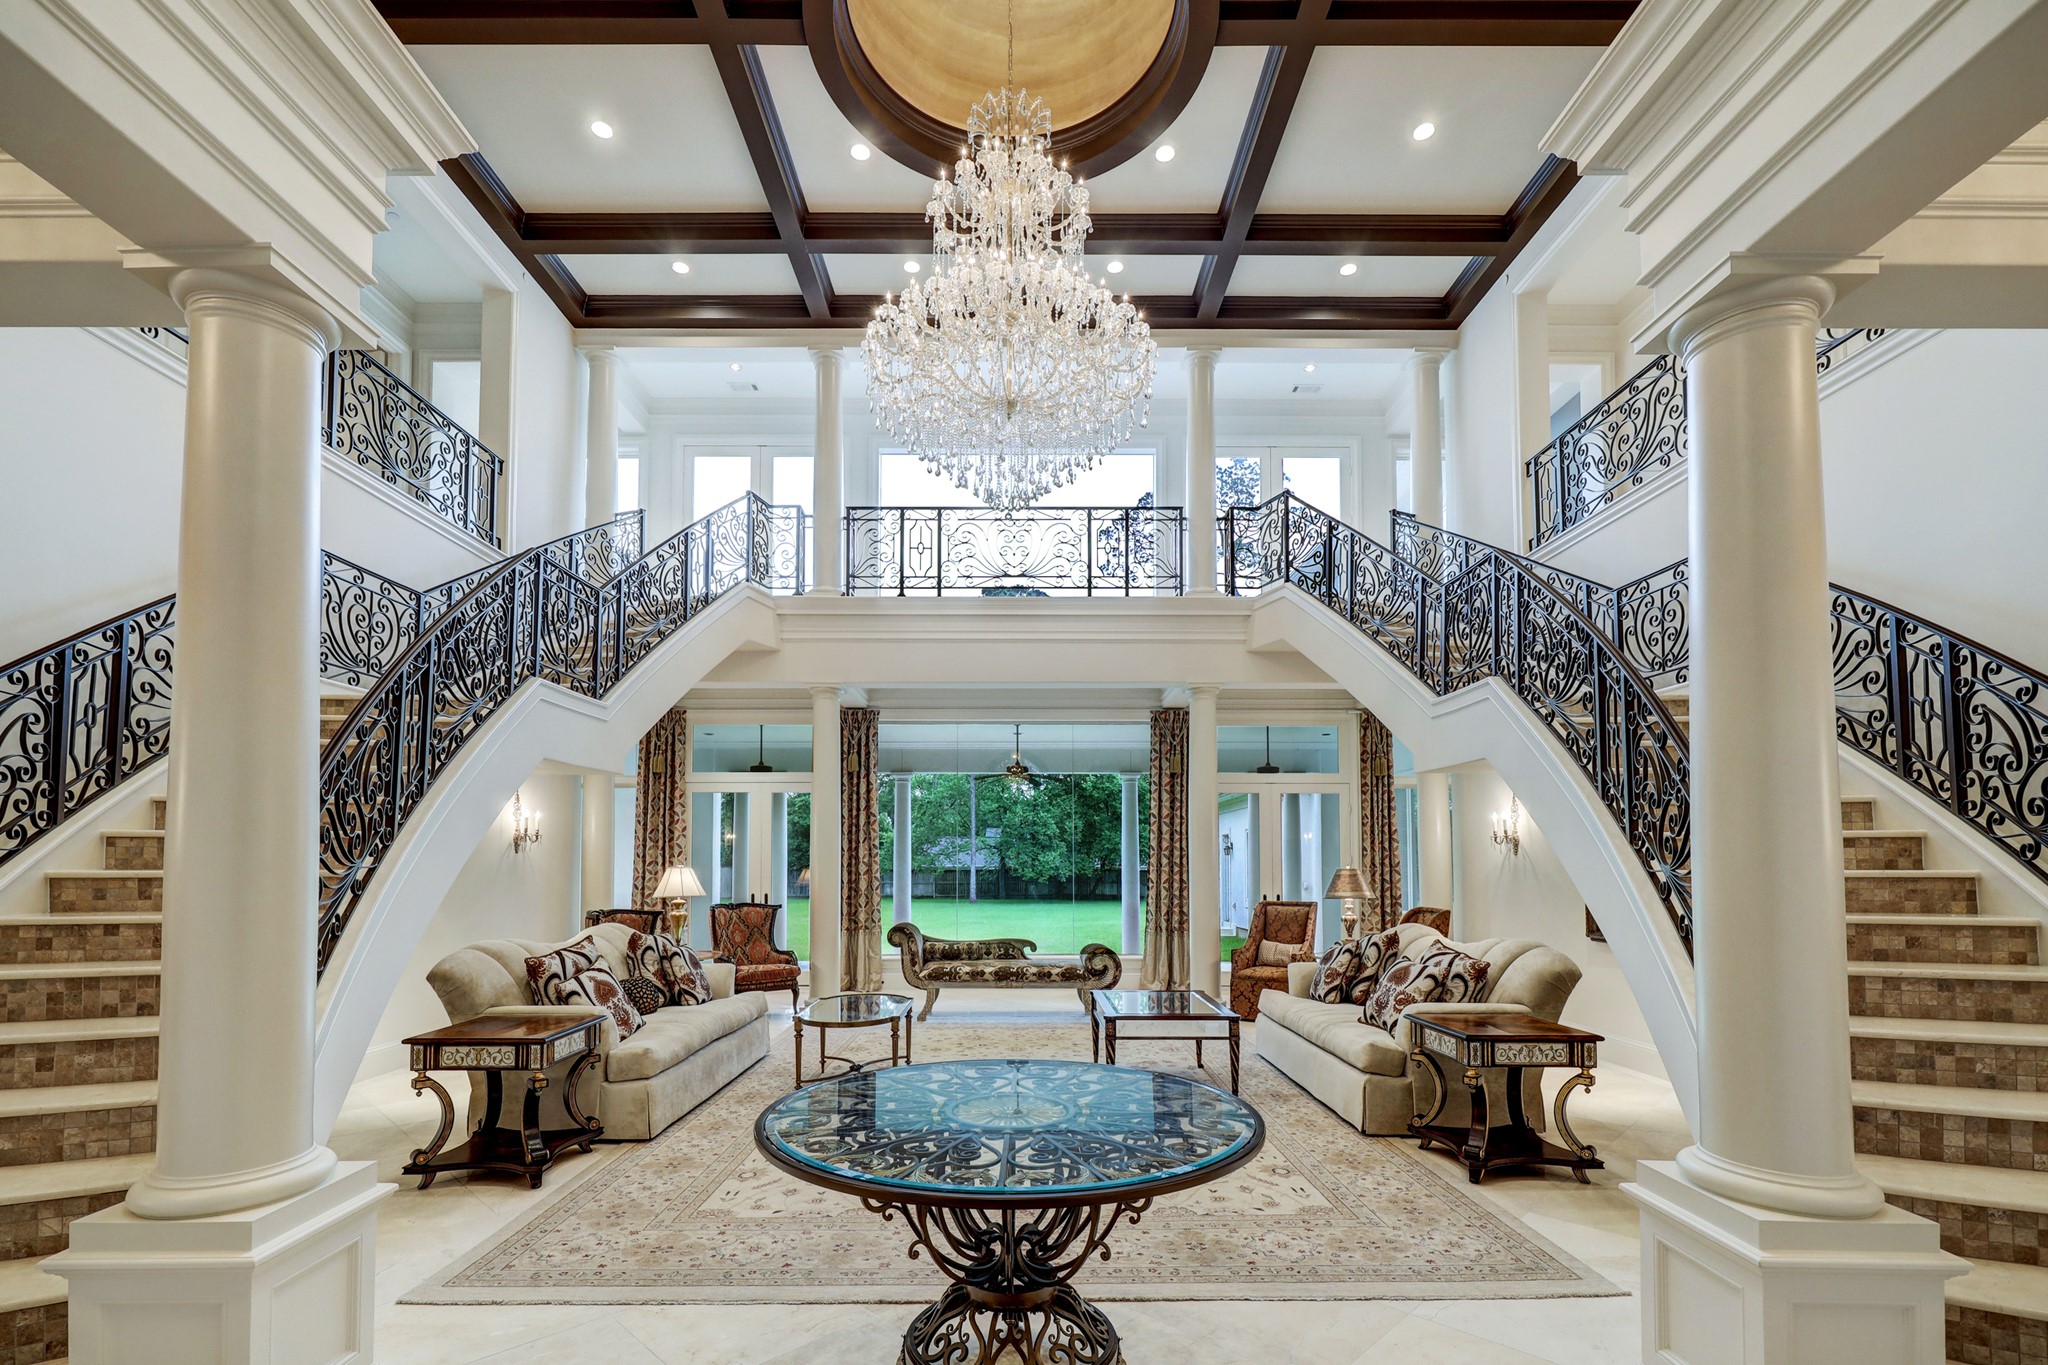 The grand two-story foyer opens into the Formal Living room and features double staircases with decorative wrought-iron railings, coffered ceilings, tile floors, decorative columns, a stunning hanging chandelier and great picture window views of the backyard.